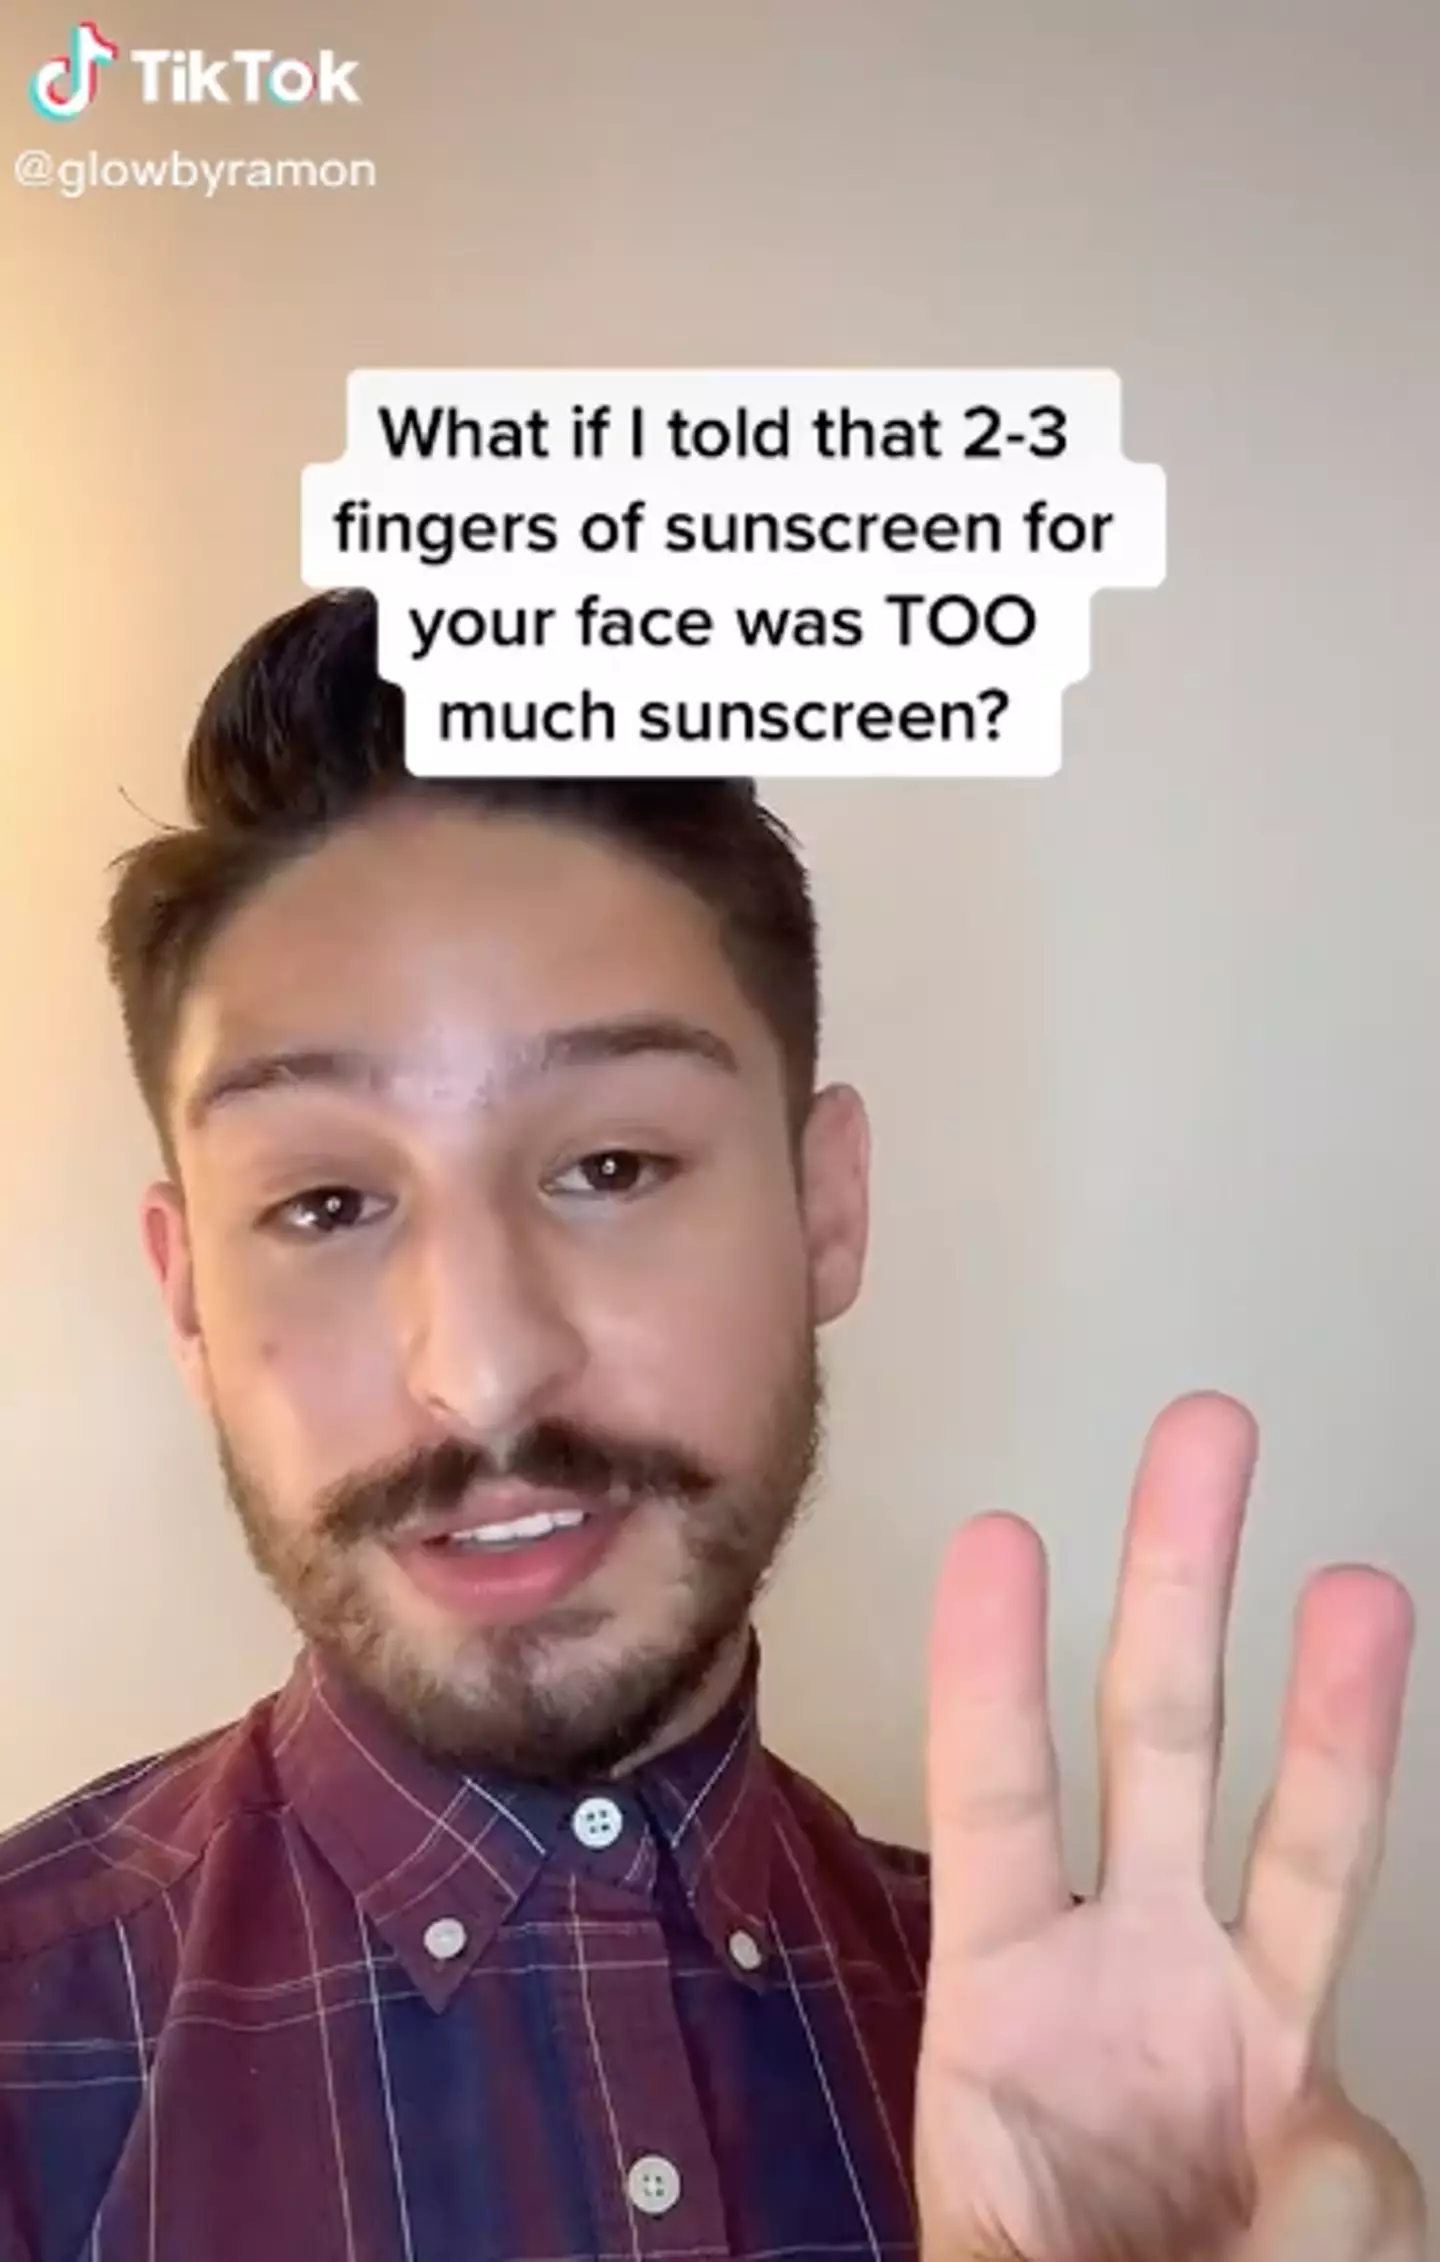 This TikTokker and skincare expert has some advice (